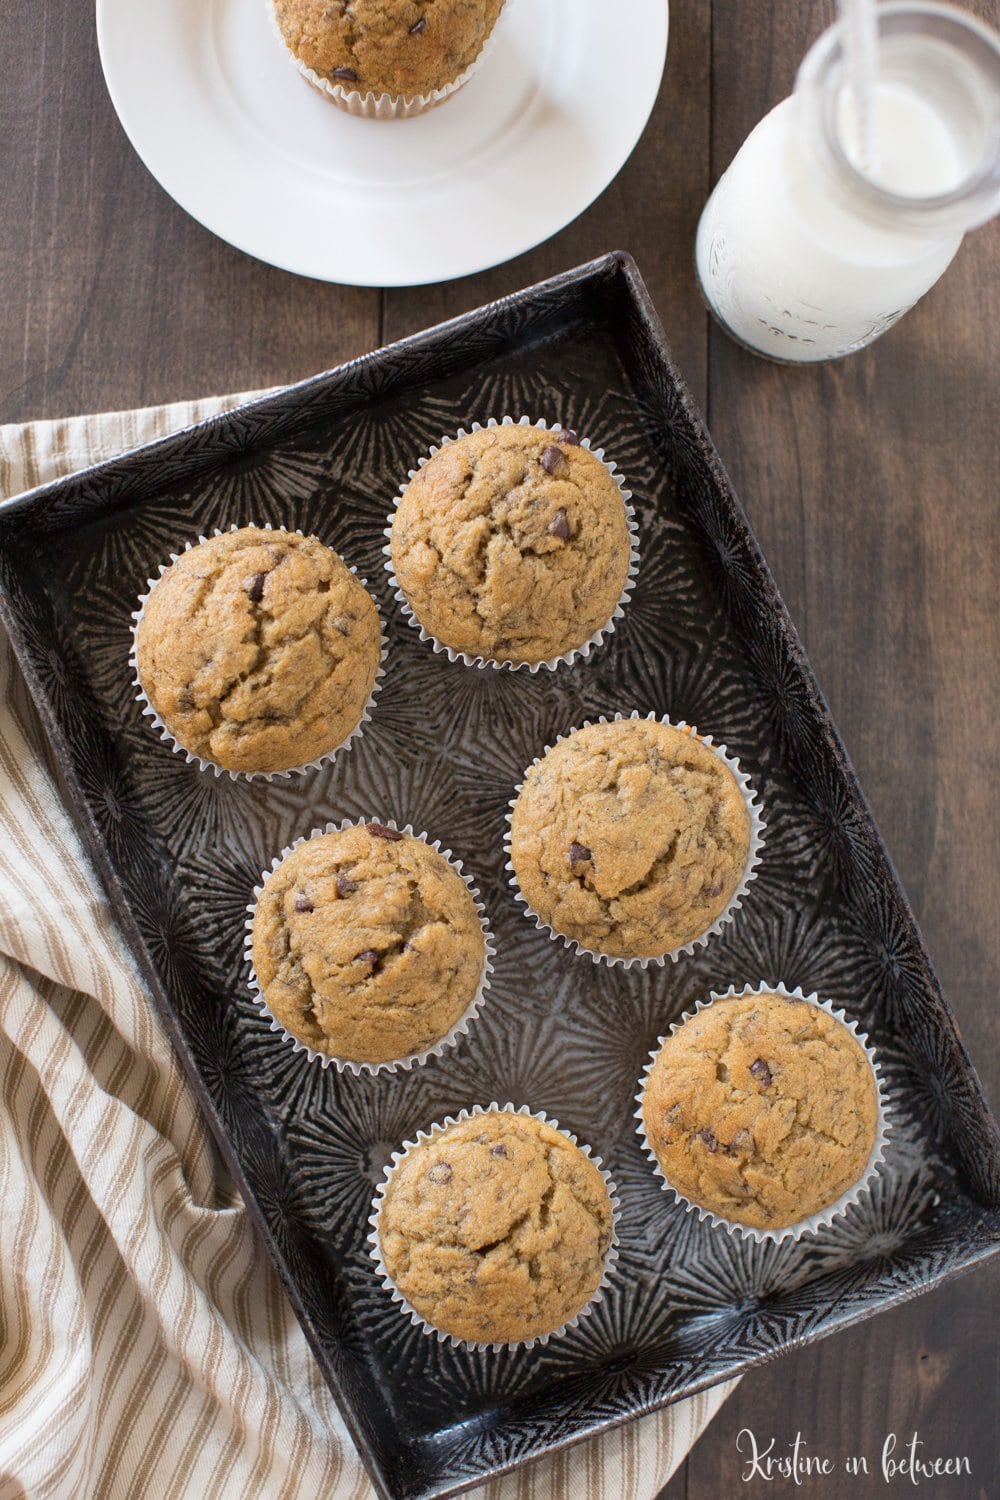 You'll love these whole wheat peanut butter banana muffins!